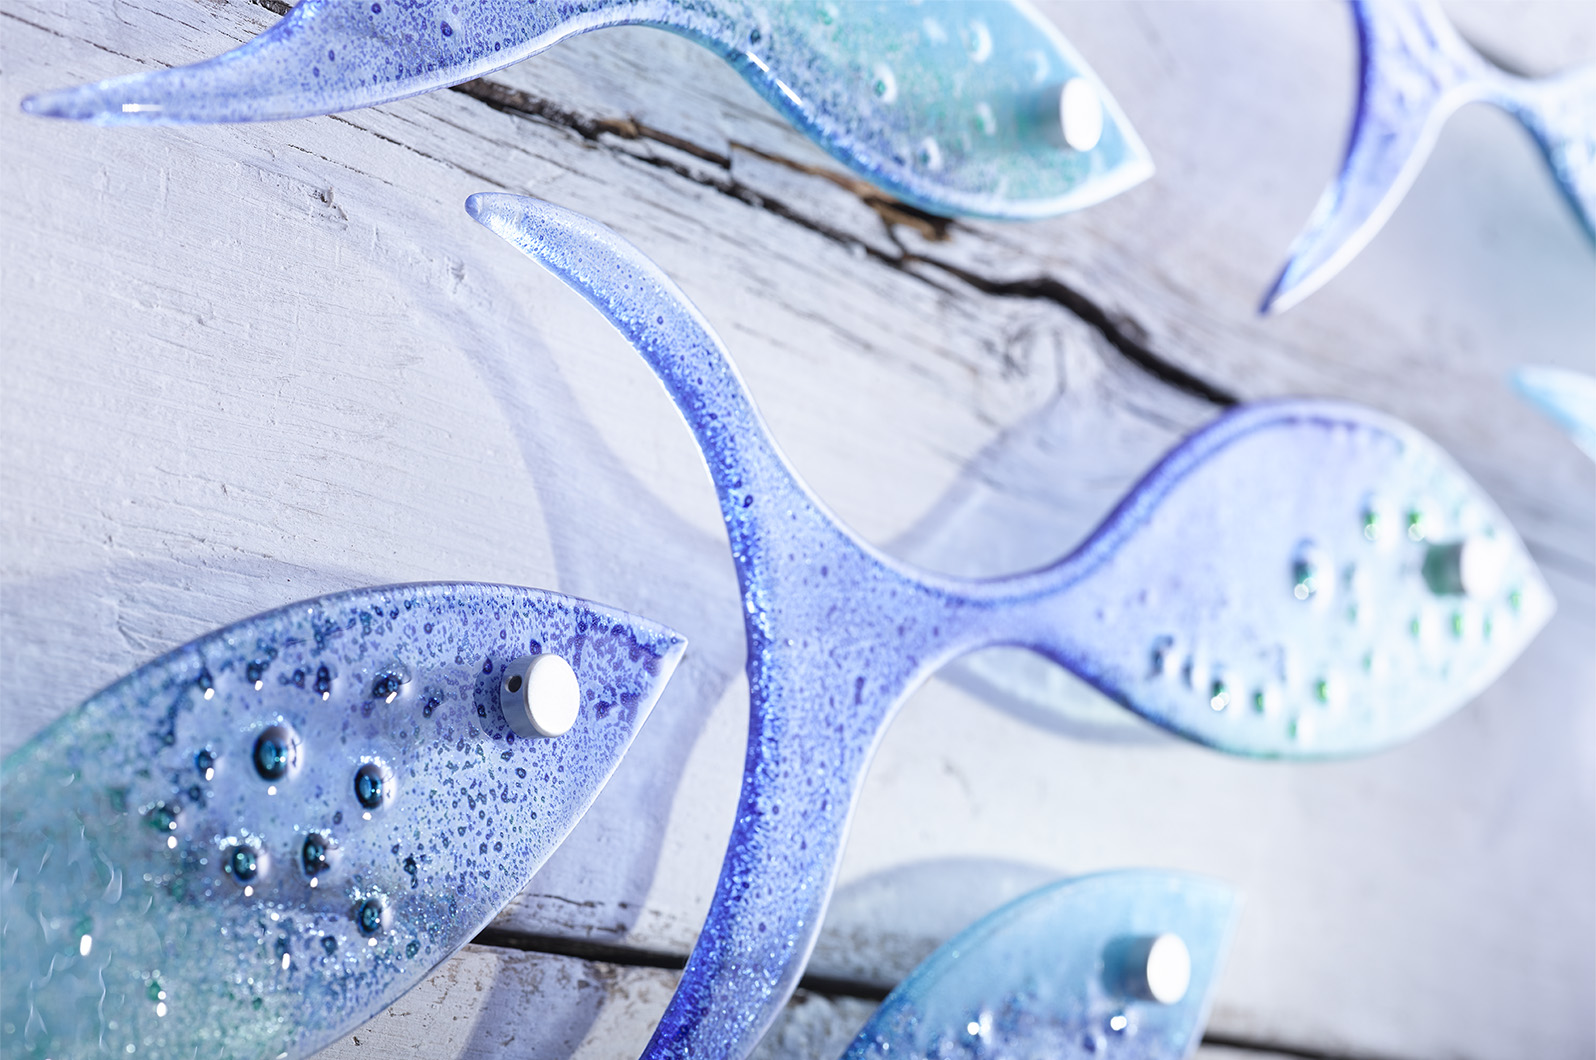 Detail image to convey the texture and reflective nature of the glass fish.